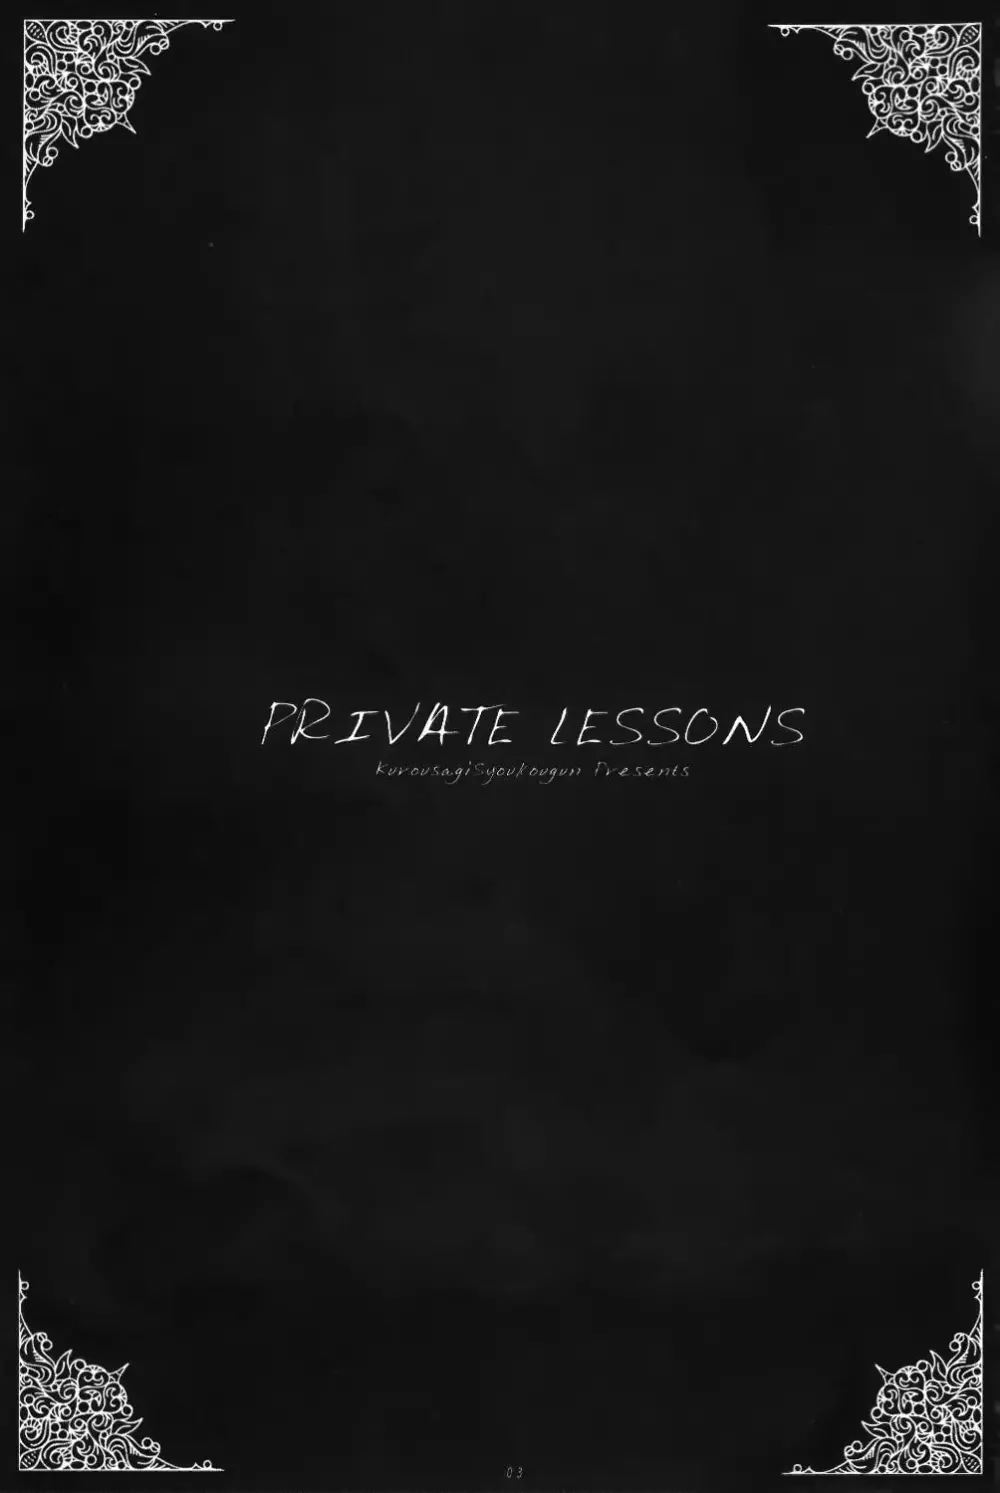 PRIVATE LESSONS - page4